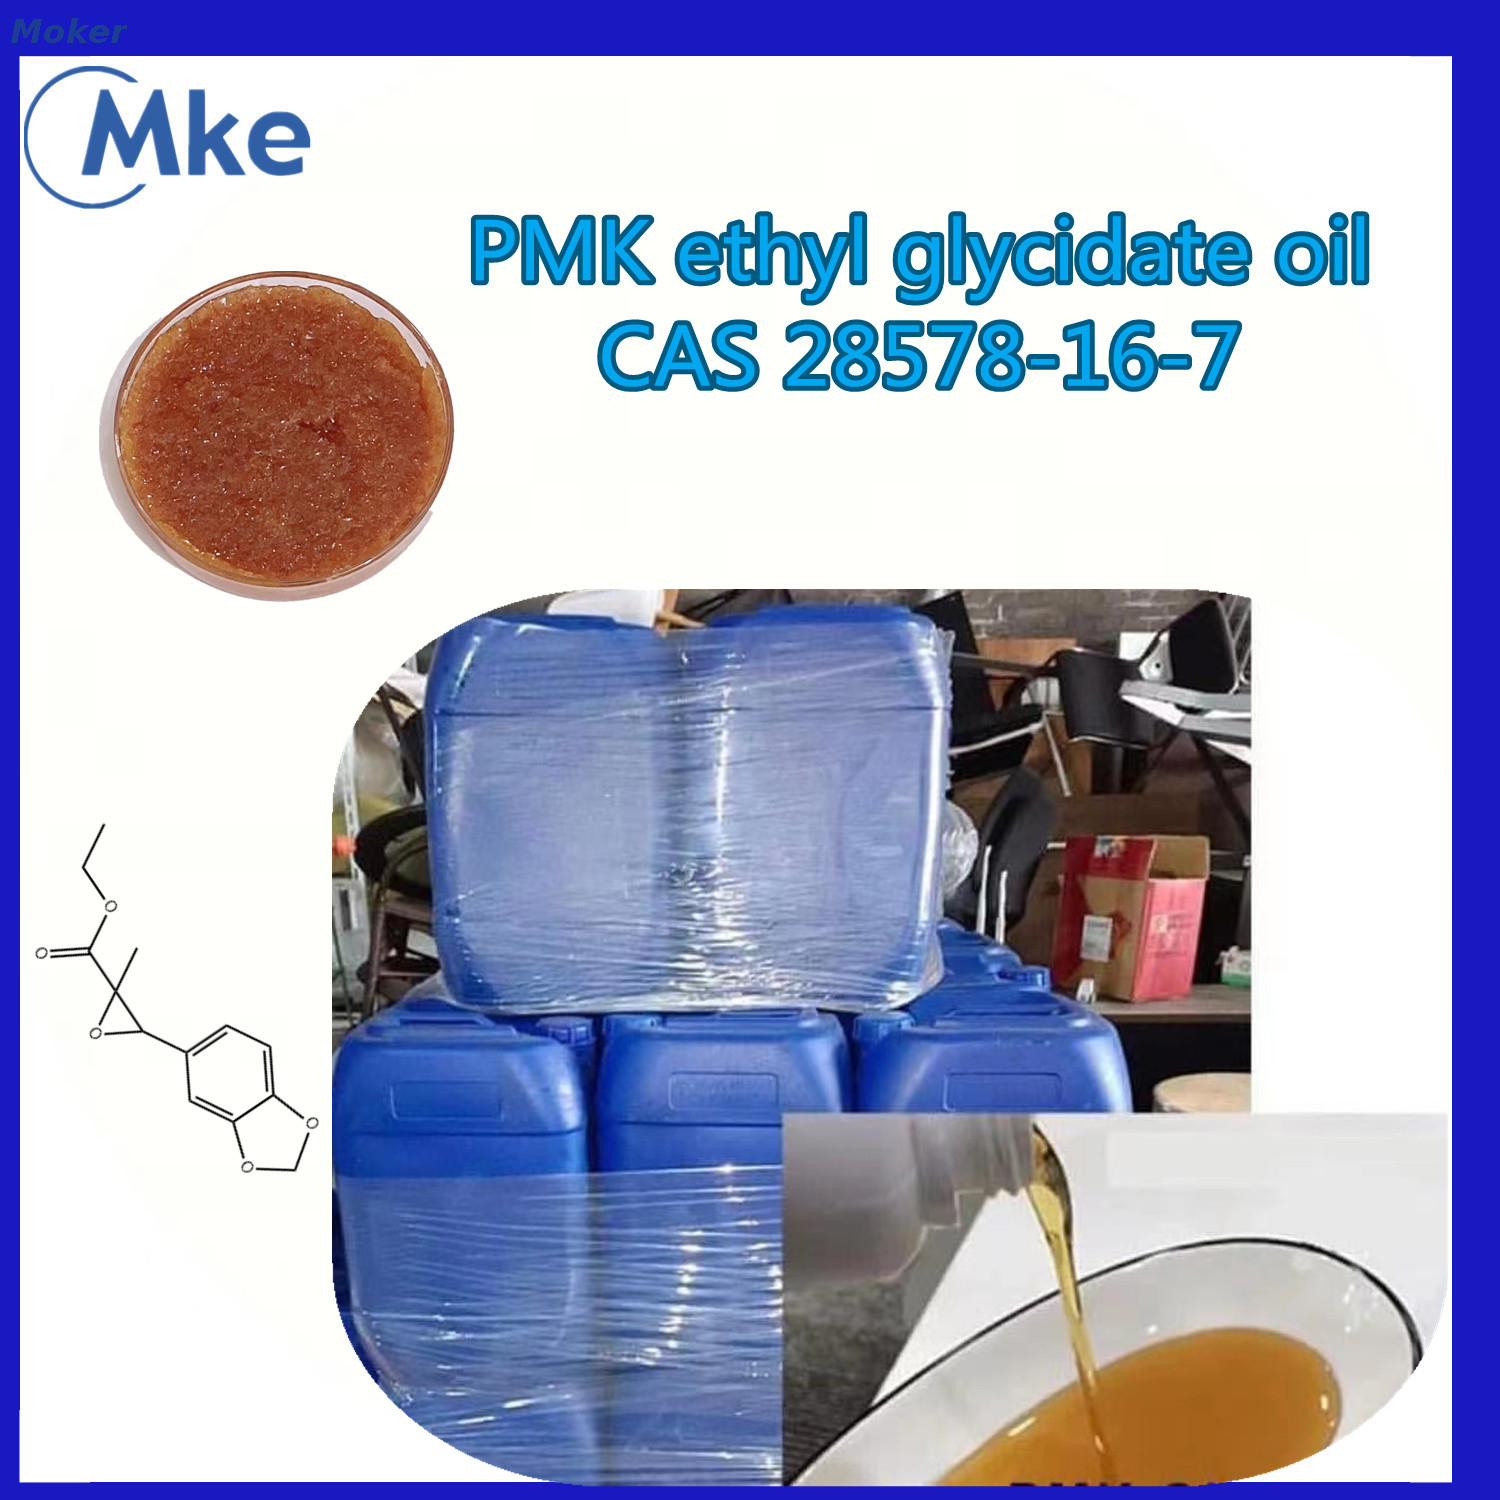 MKE Supply 85% Yield Rate New Pmk Ethyl Glycidate Powder Replacements Cas 28578-16-7